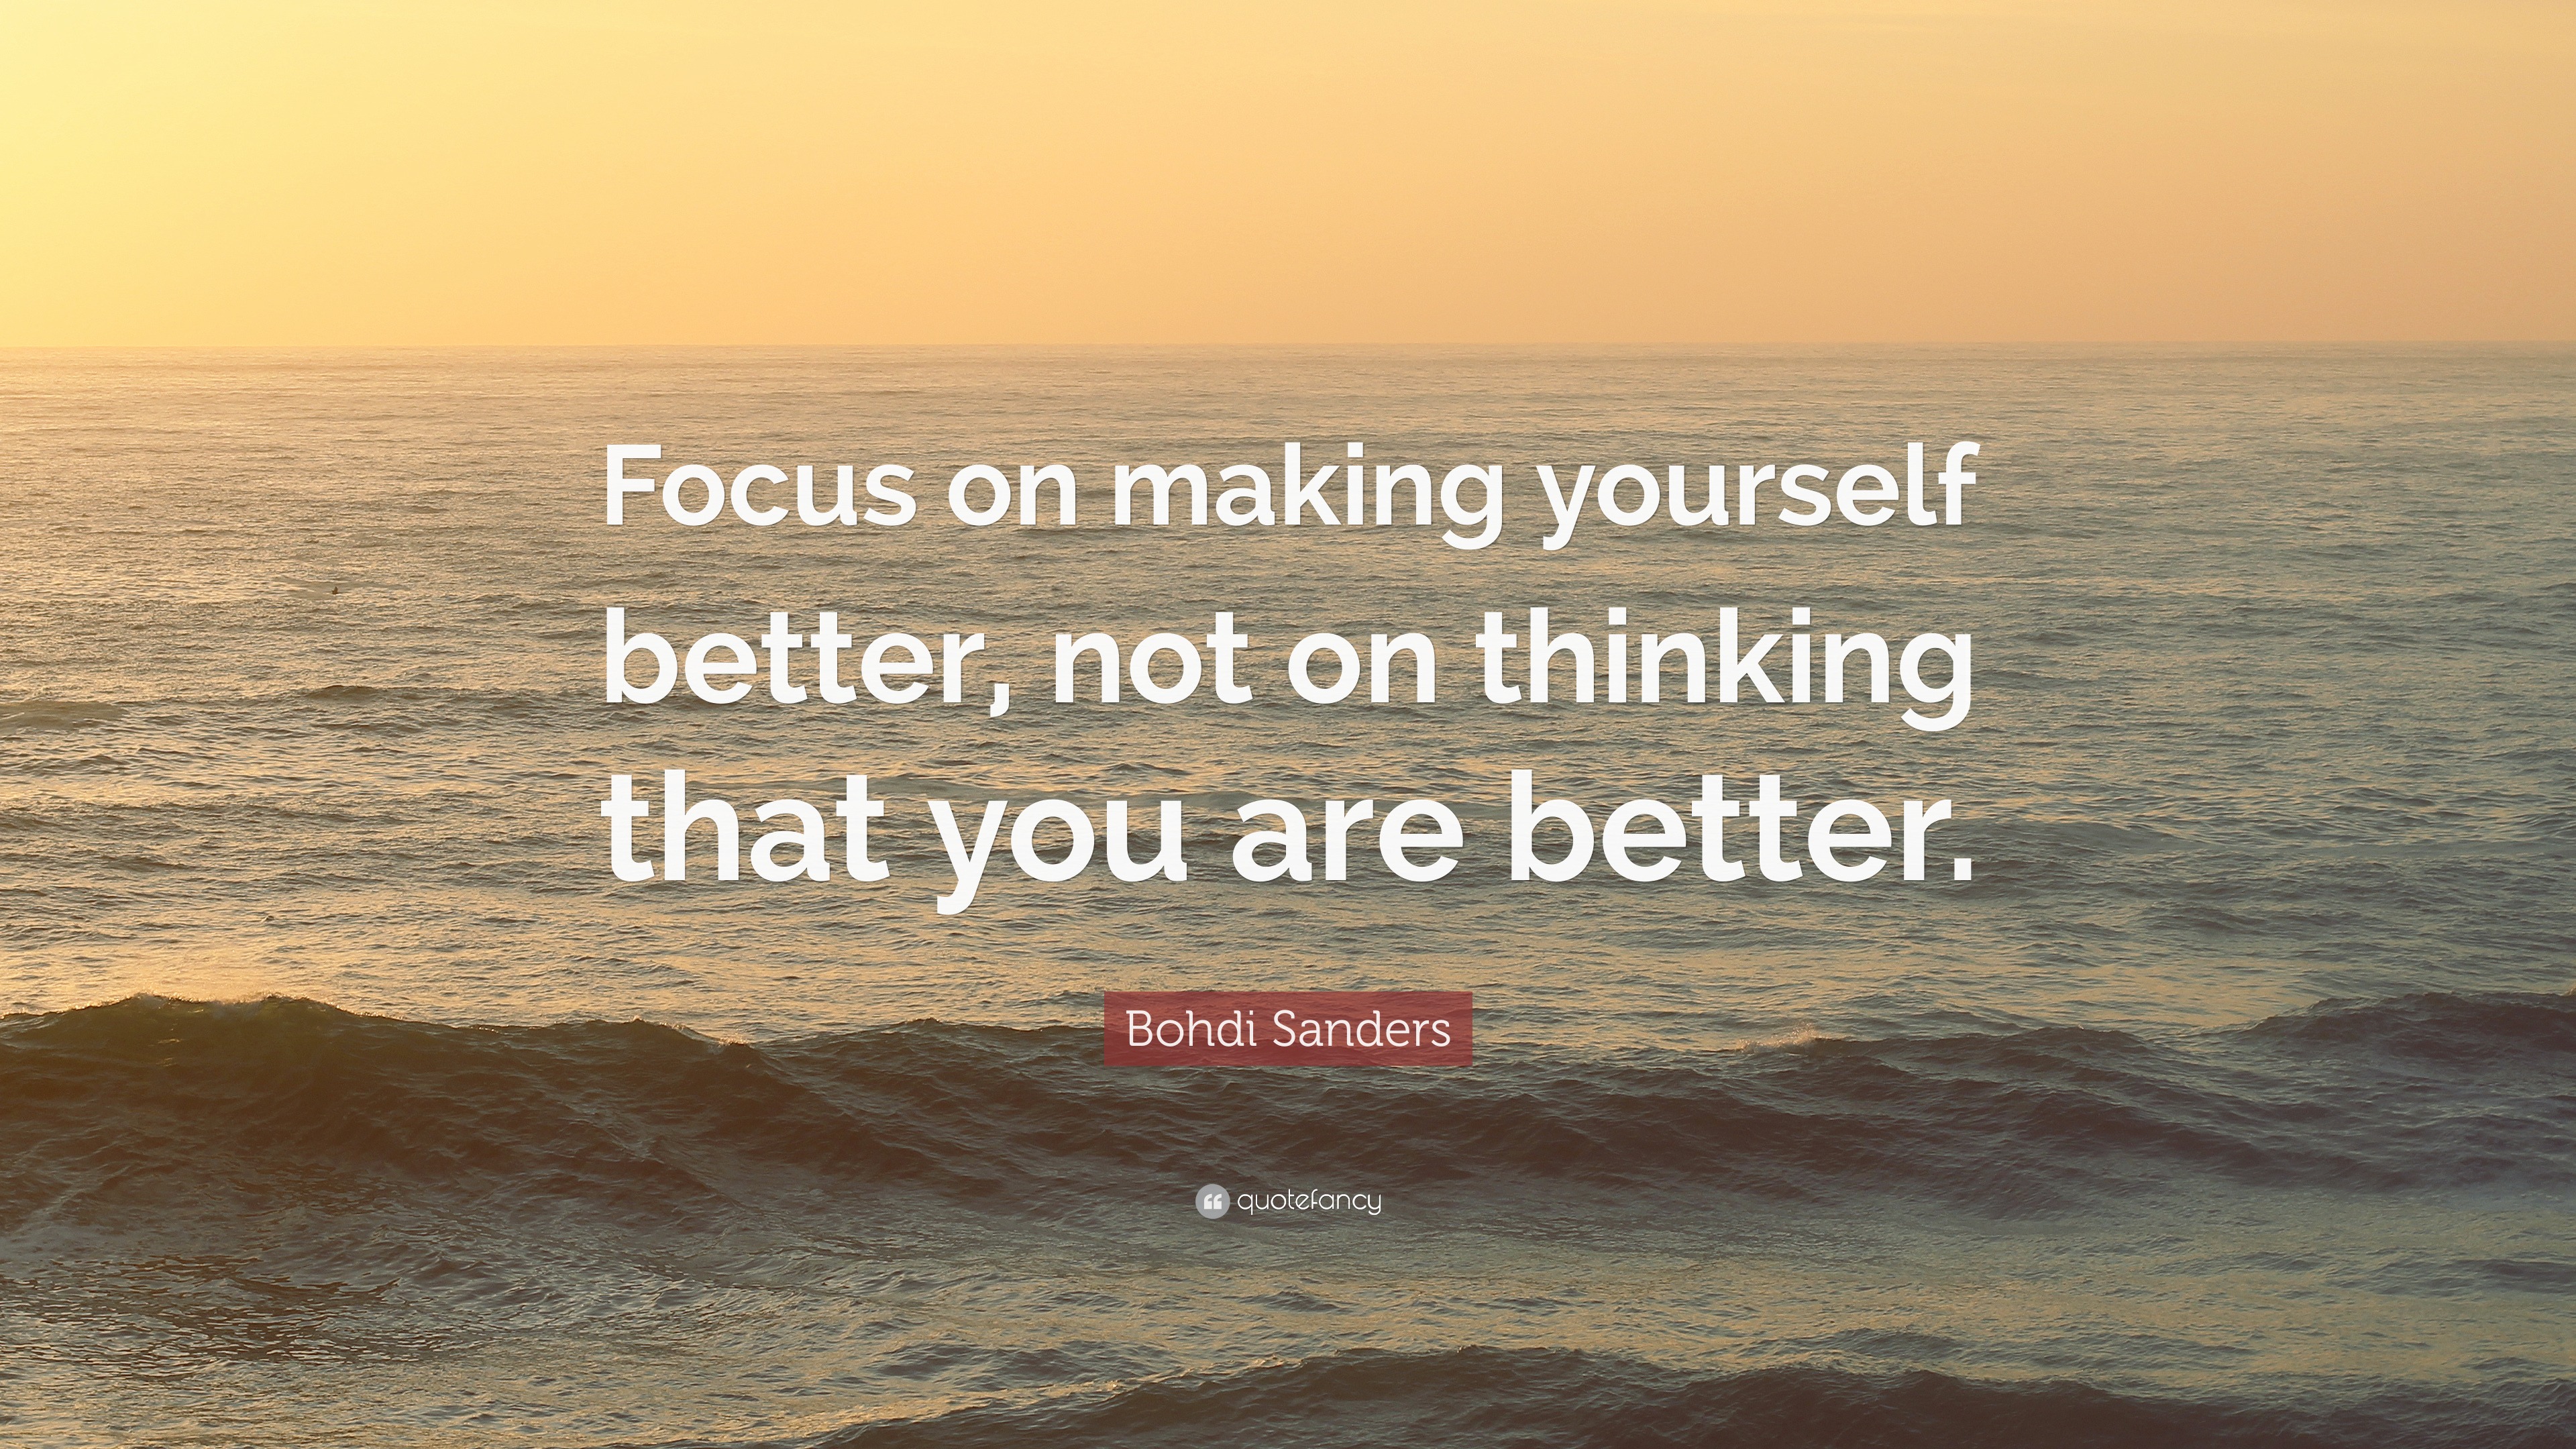 Bohdi Sanders Quote: “Focus on making yourself better, not on thinking